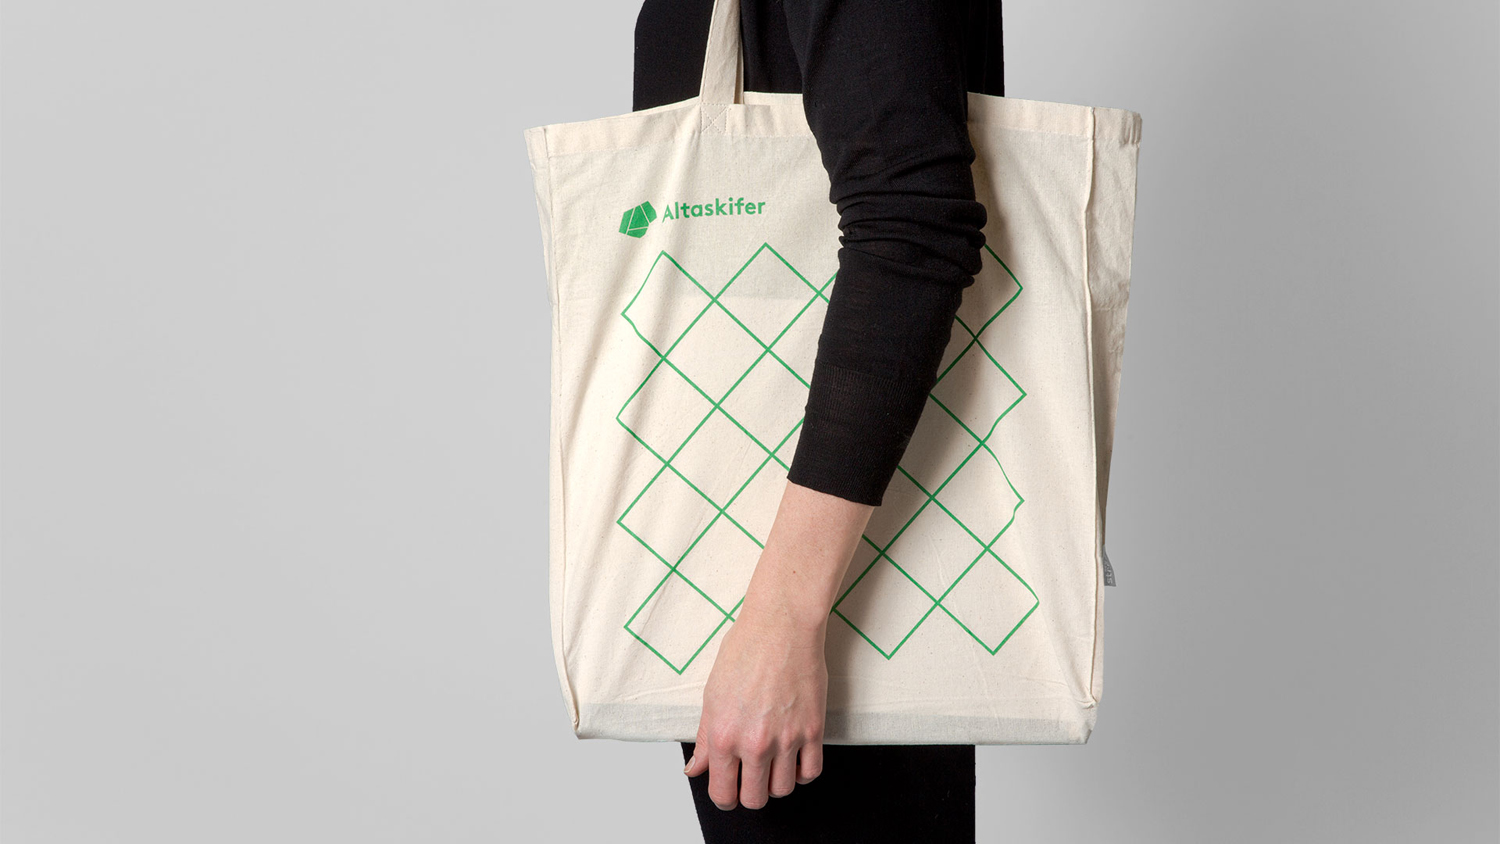 Brand identity and branded tote bag for Alta Quartzite mining and sales business Altaskifer designed by Neue, Norway